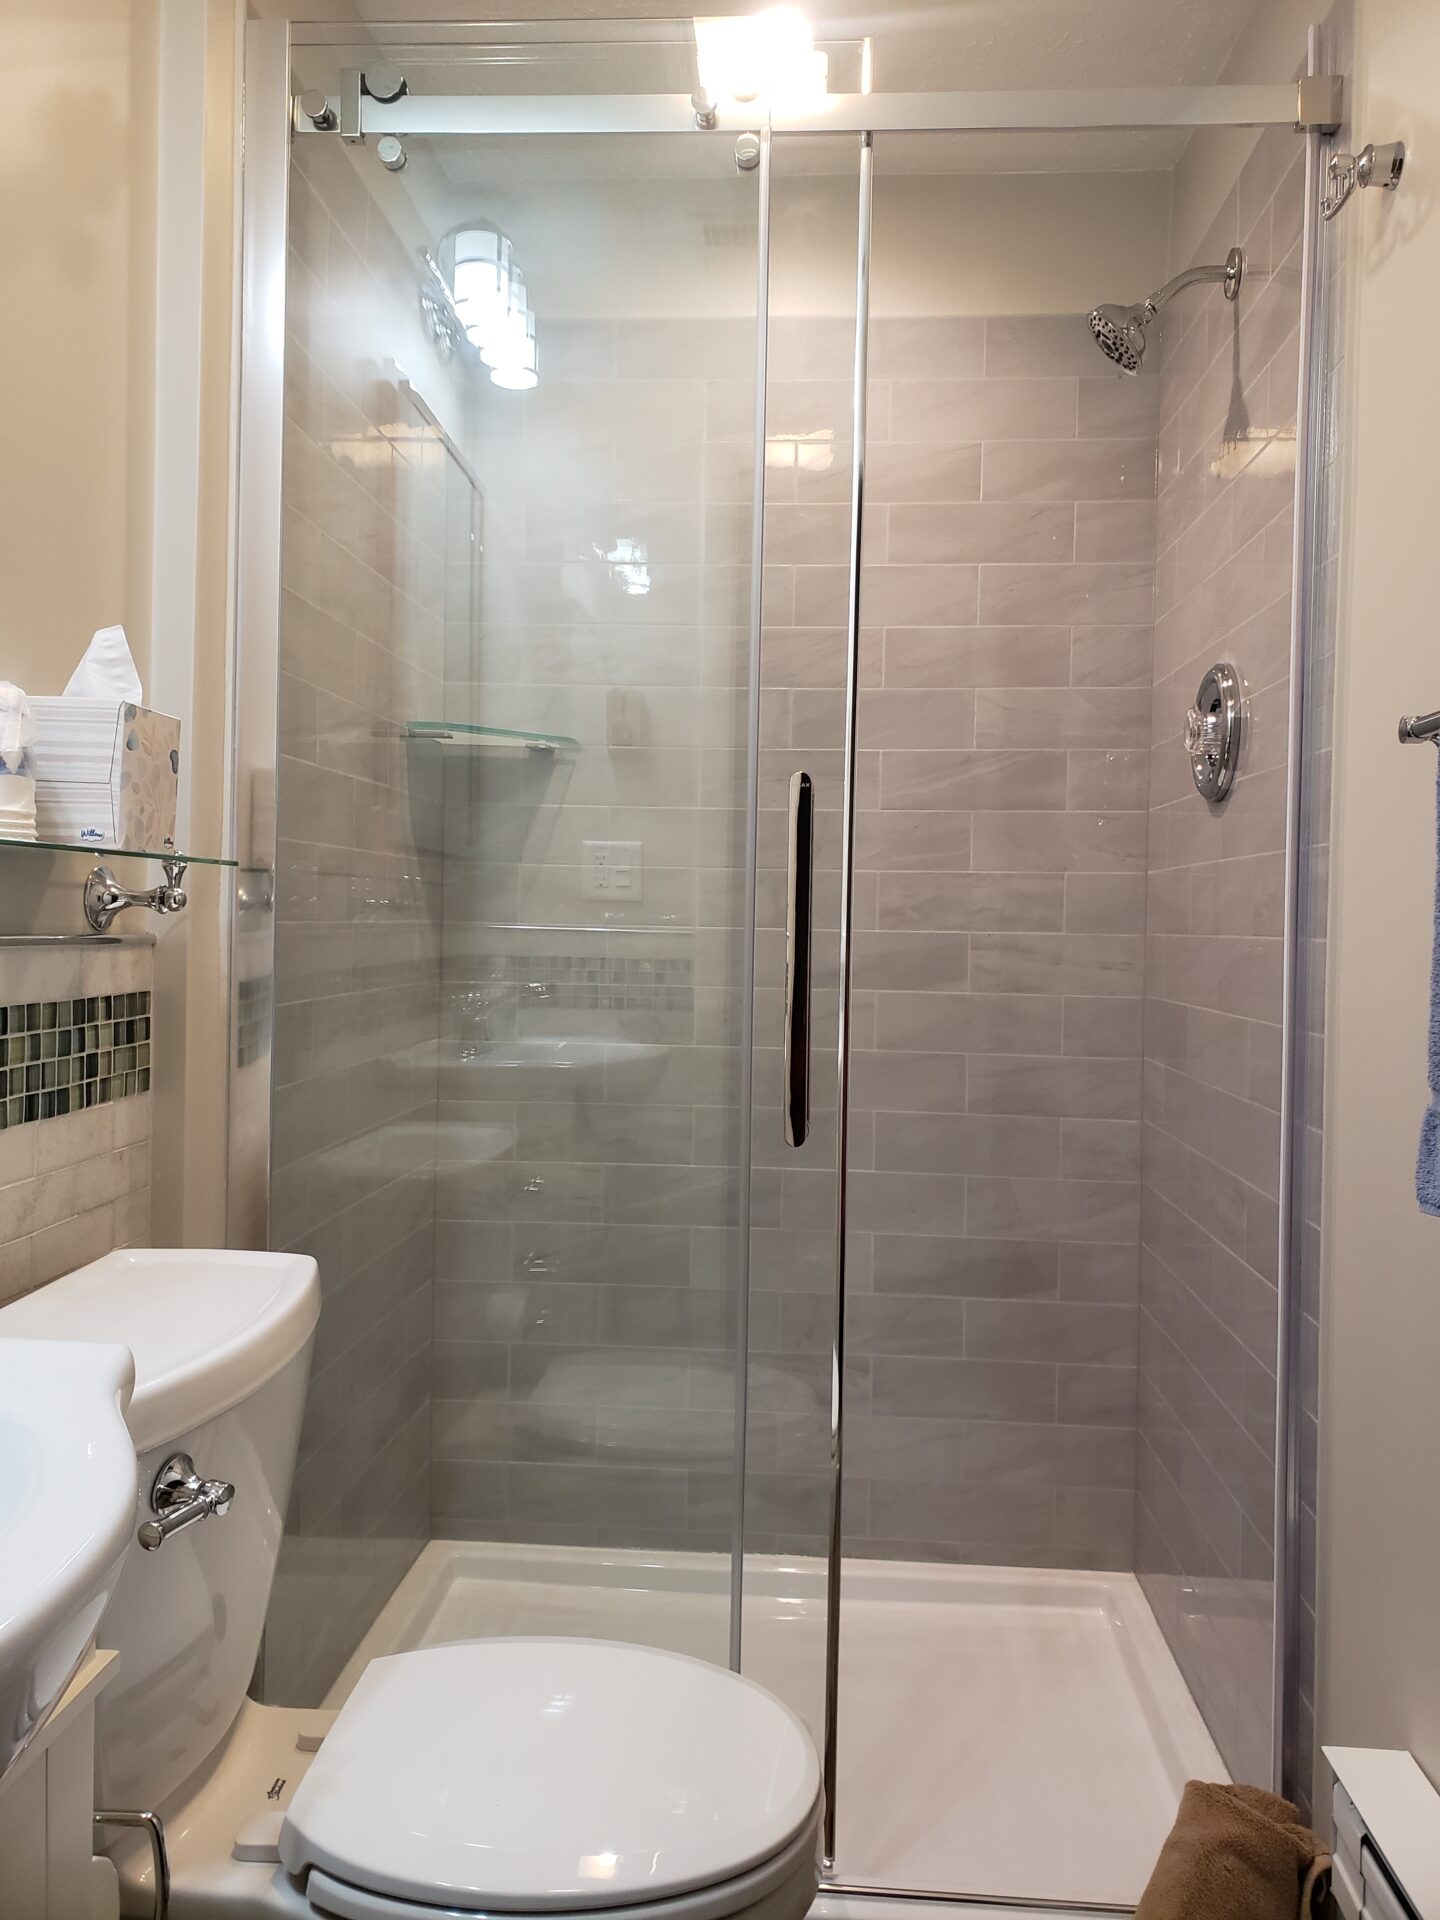 A picture of the shower bath in the beachfront house